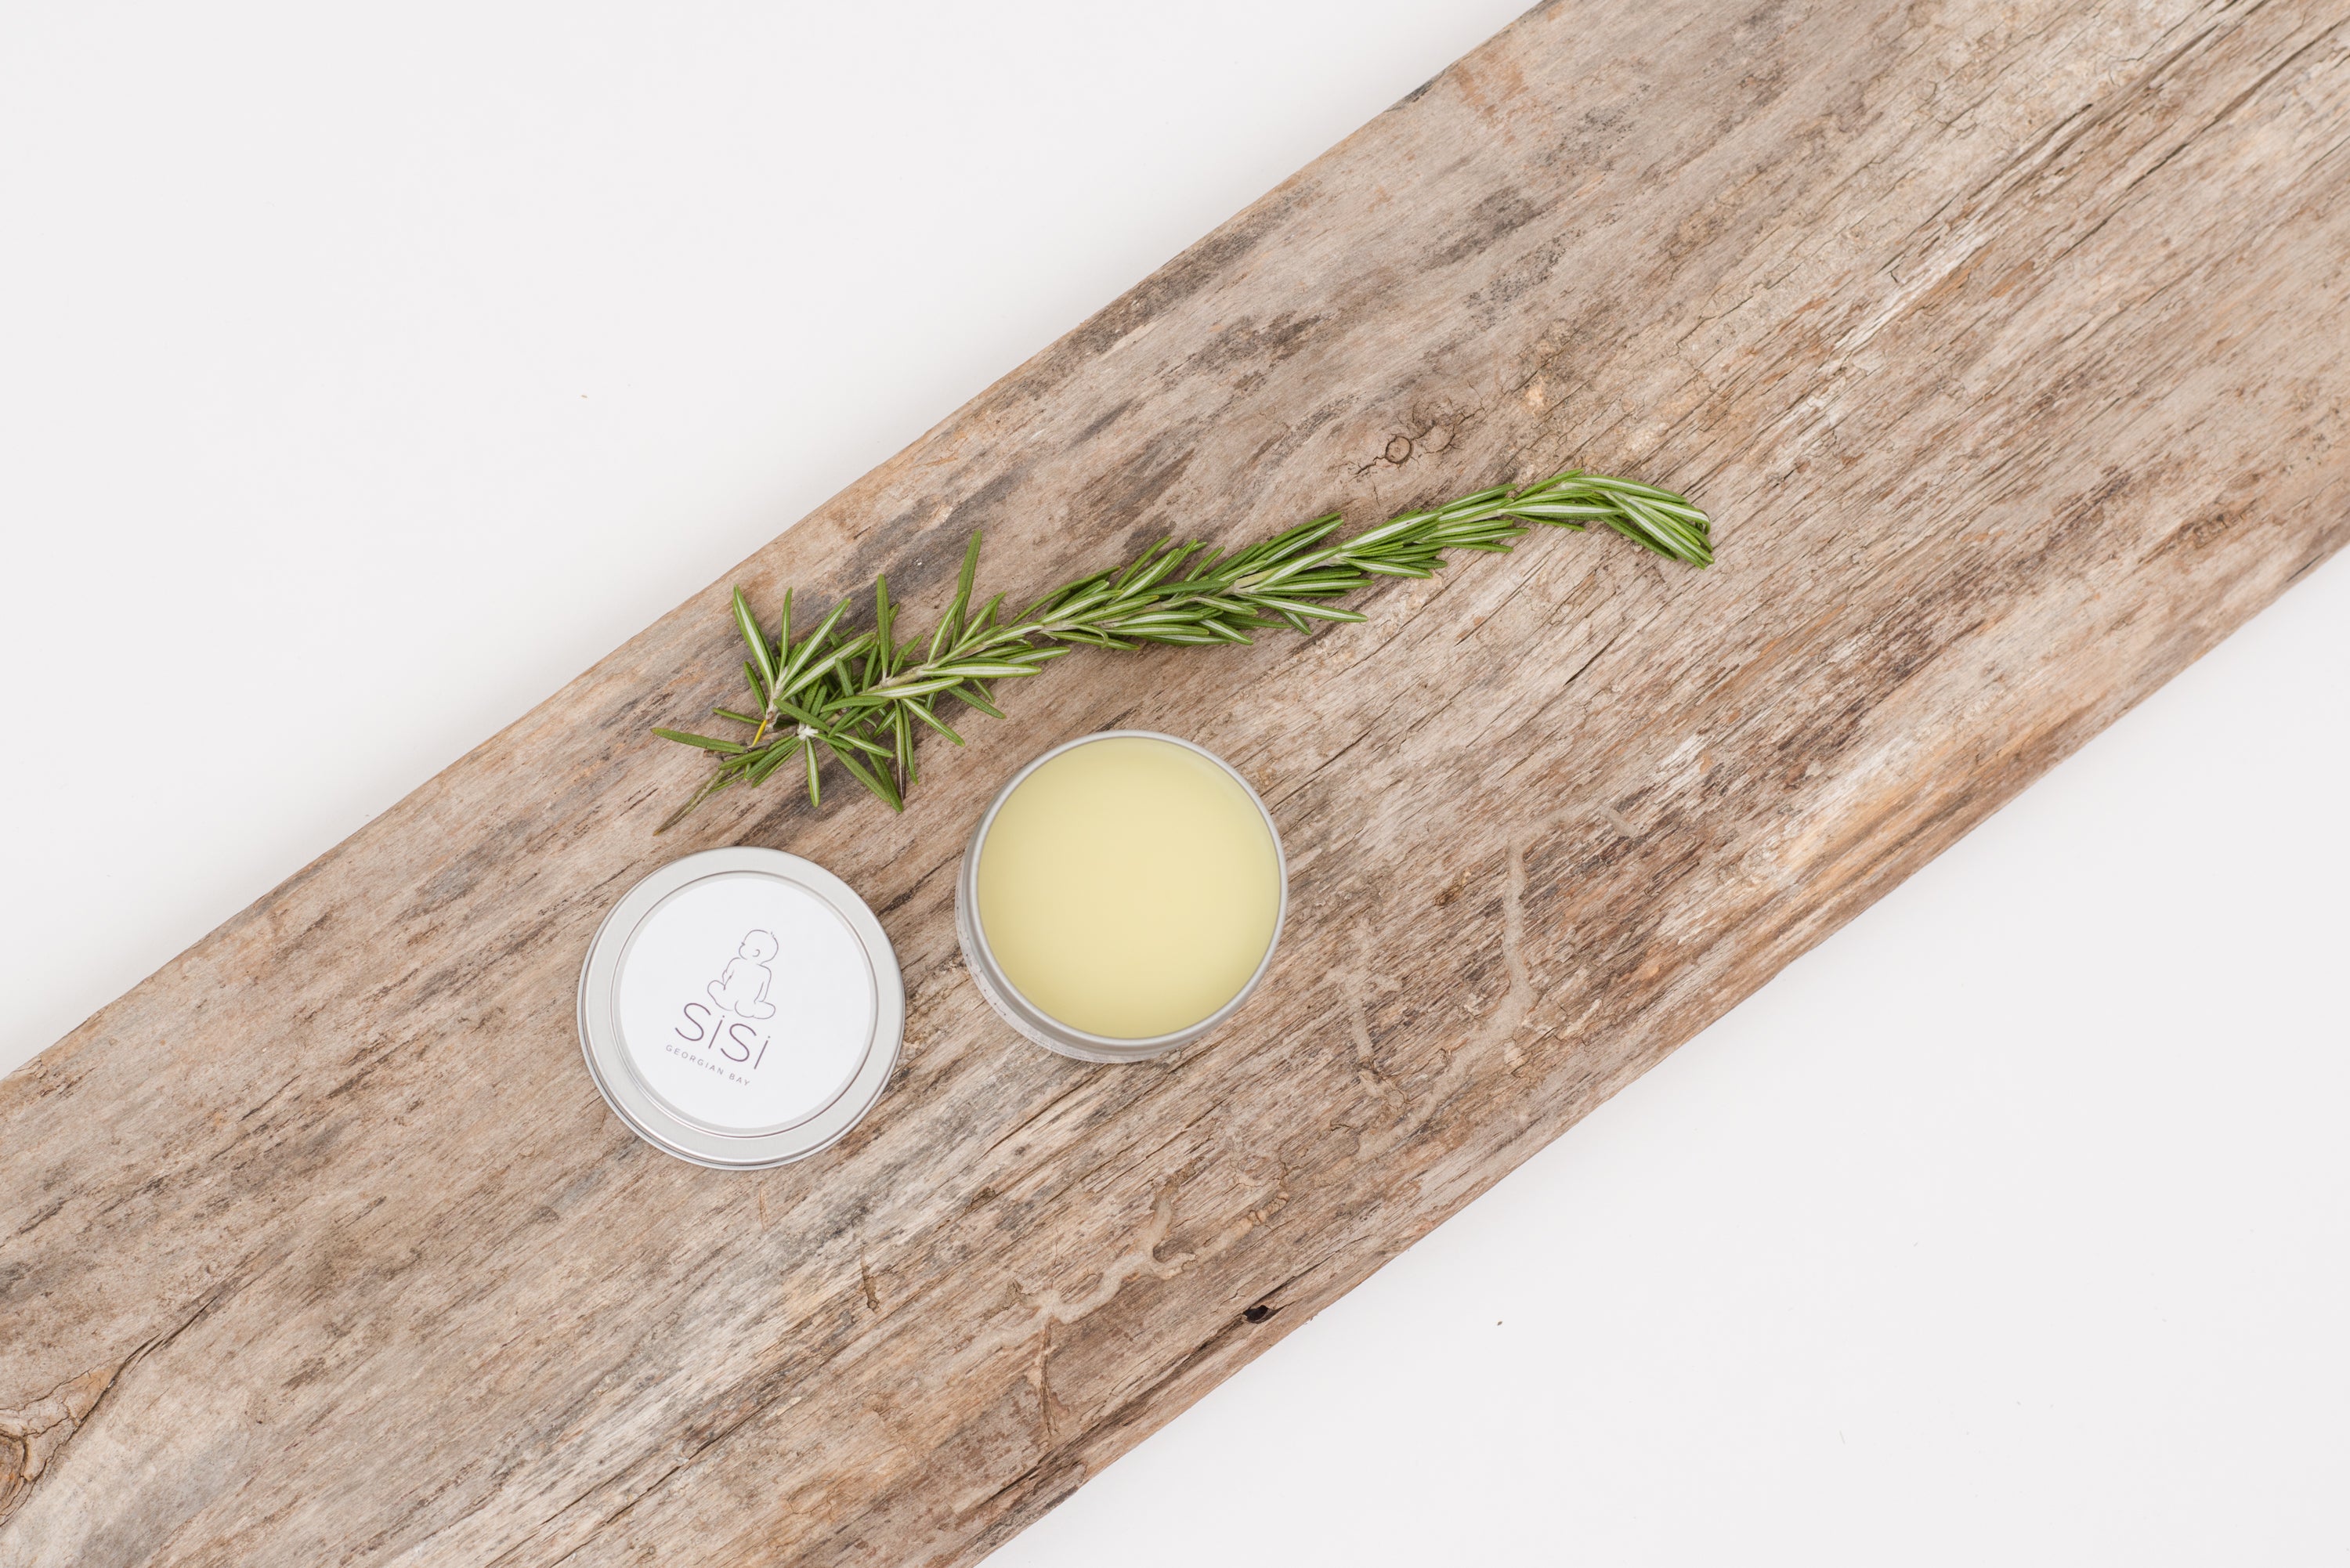 natural skincare products - a photo of a piece of rustic but nice looking wood on a diagonal with a creamy white background with a tin of natural baby balm on it with a green leafy sprig laying beside it